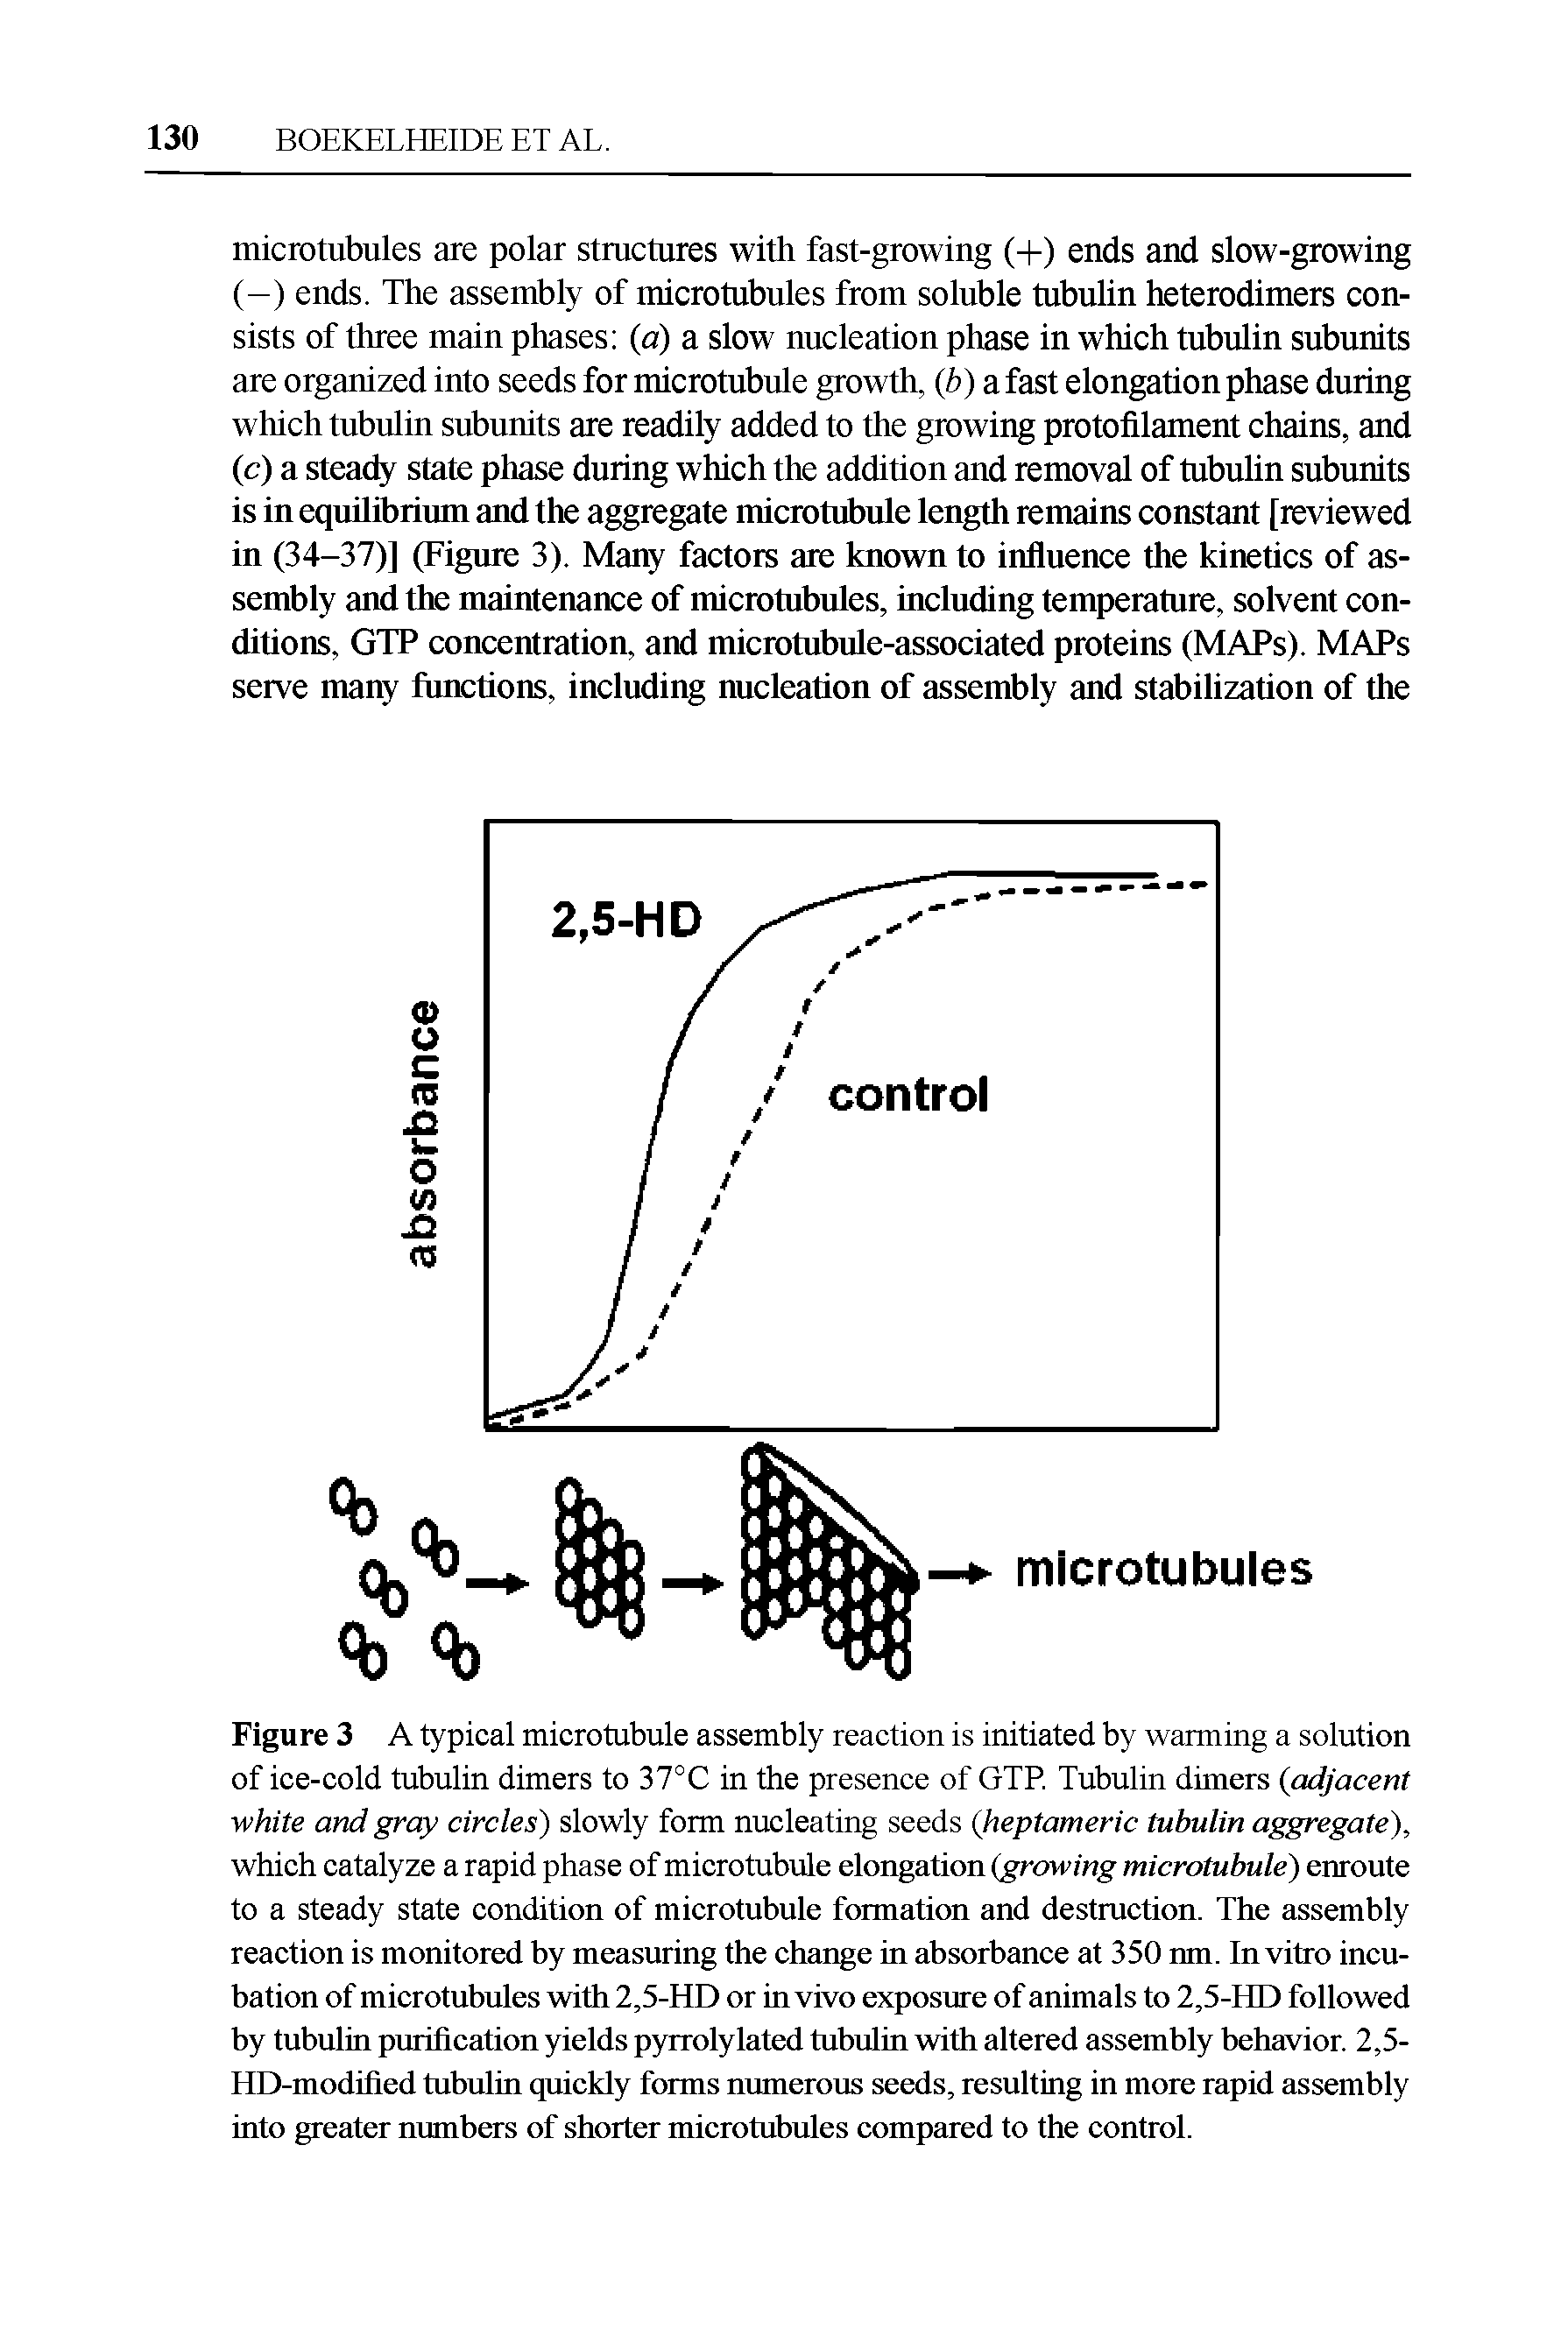 Figure 3 A typical microtubule assembly reaction is initiated by warming a solution of ice-cold tubulin dimers to 37°C in the presence of GTP. Tubulin dimers (adjacent white and gray circles) slowly form nucleating seeds (heptameric tubulin aggregate), which catalyze a rapid phase of microtubule elongation (growing microtubule) enroute to a steady state condition of microtubule formation and destruction. The assembly reaction is monitored by measuring the change in absorbance at 350 nm. In vitro incubation of microtubules with 2,5-HD or in vivo exposure of animals to 2,5-HD followed by tubulin purification yields pyrrolylated tubulin with altered assembly behavior. 2,5-HD-modified tubulin quickly forms numerous seeds, resulting in more rapid assembly into greater numbers of shorter microtubules compared to the control.